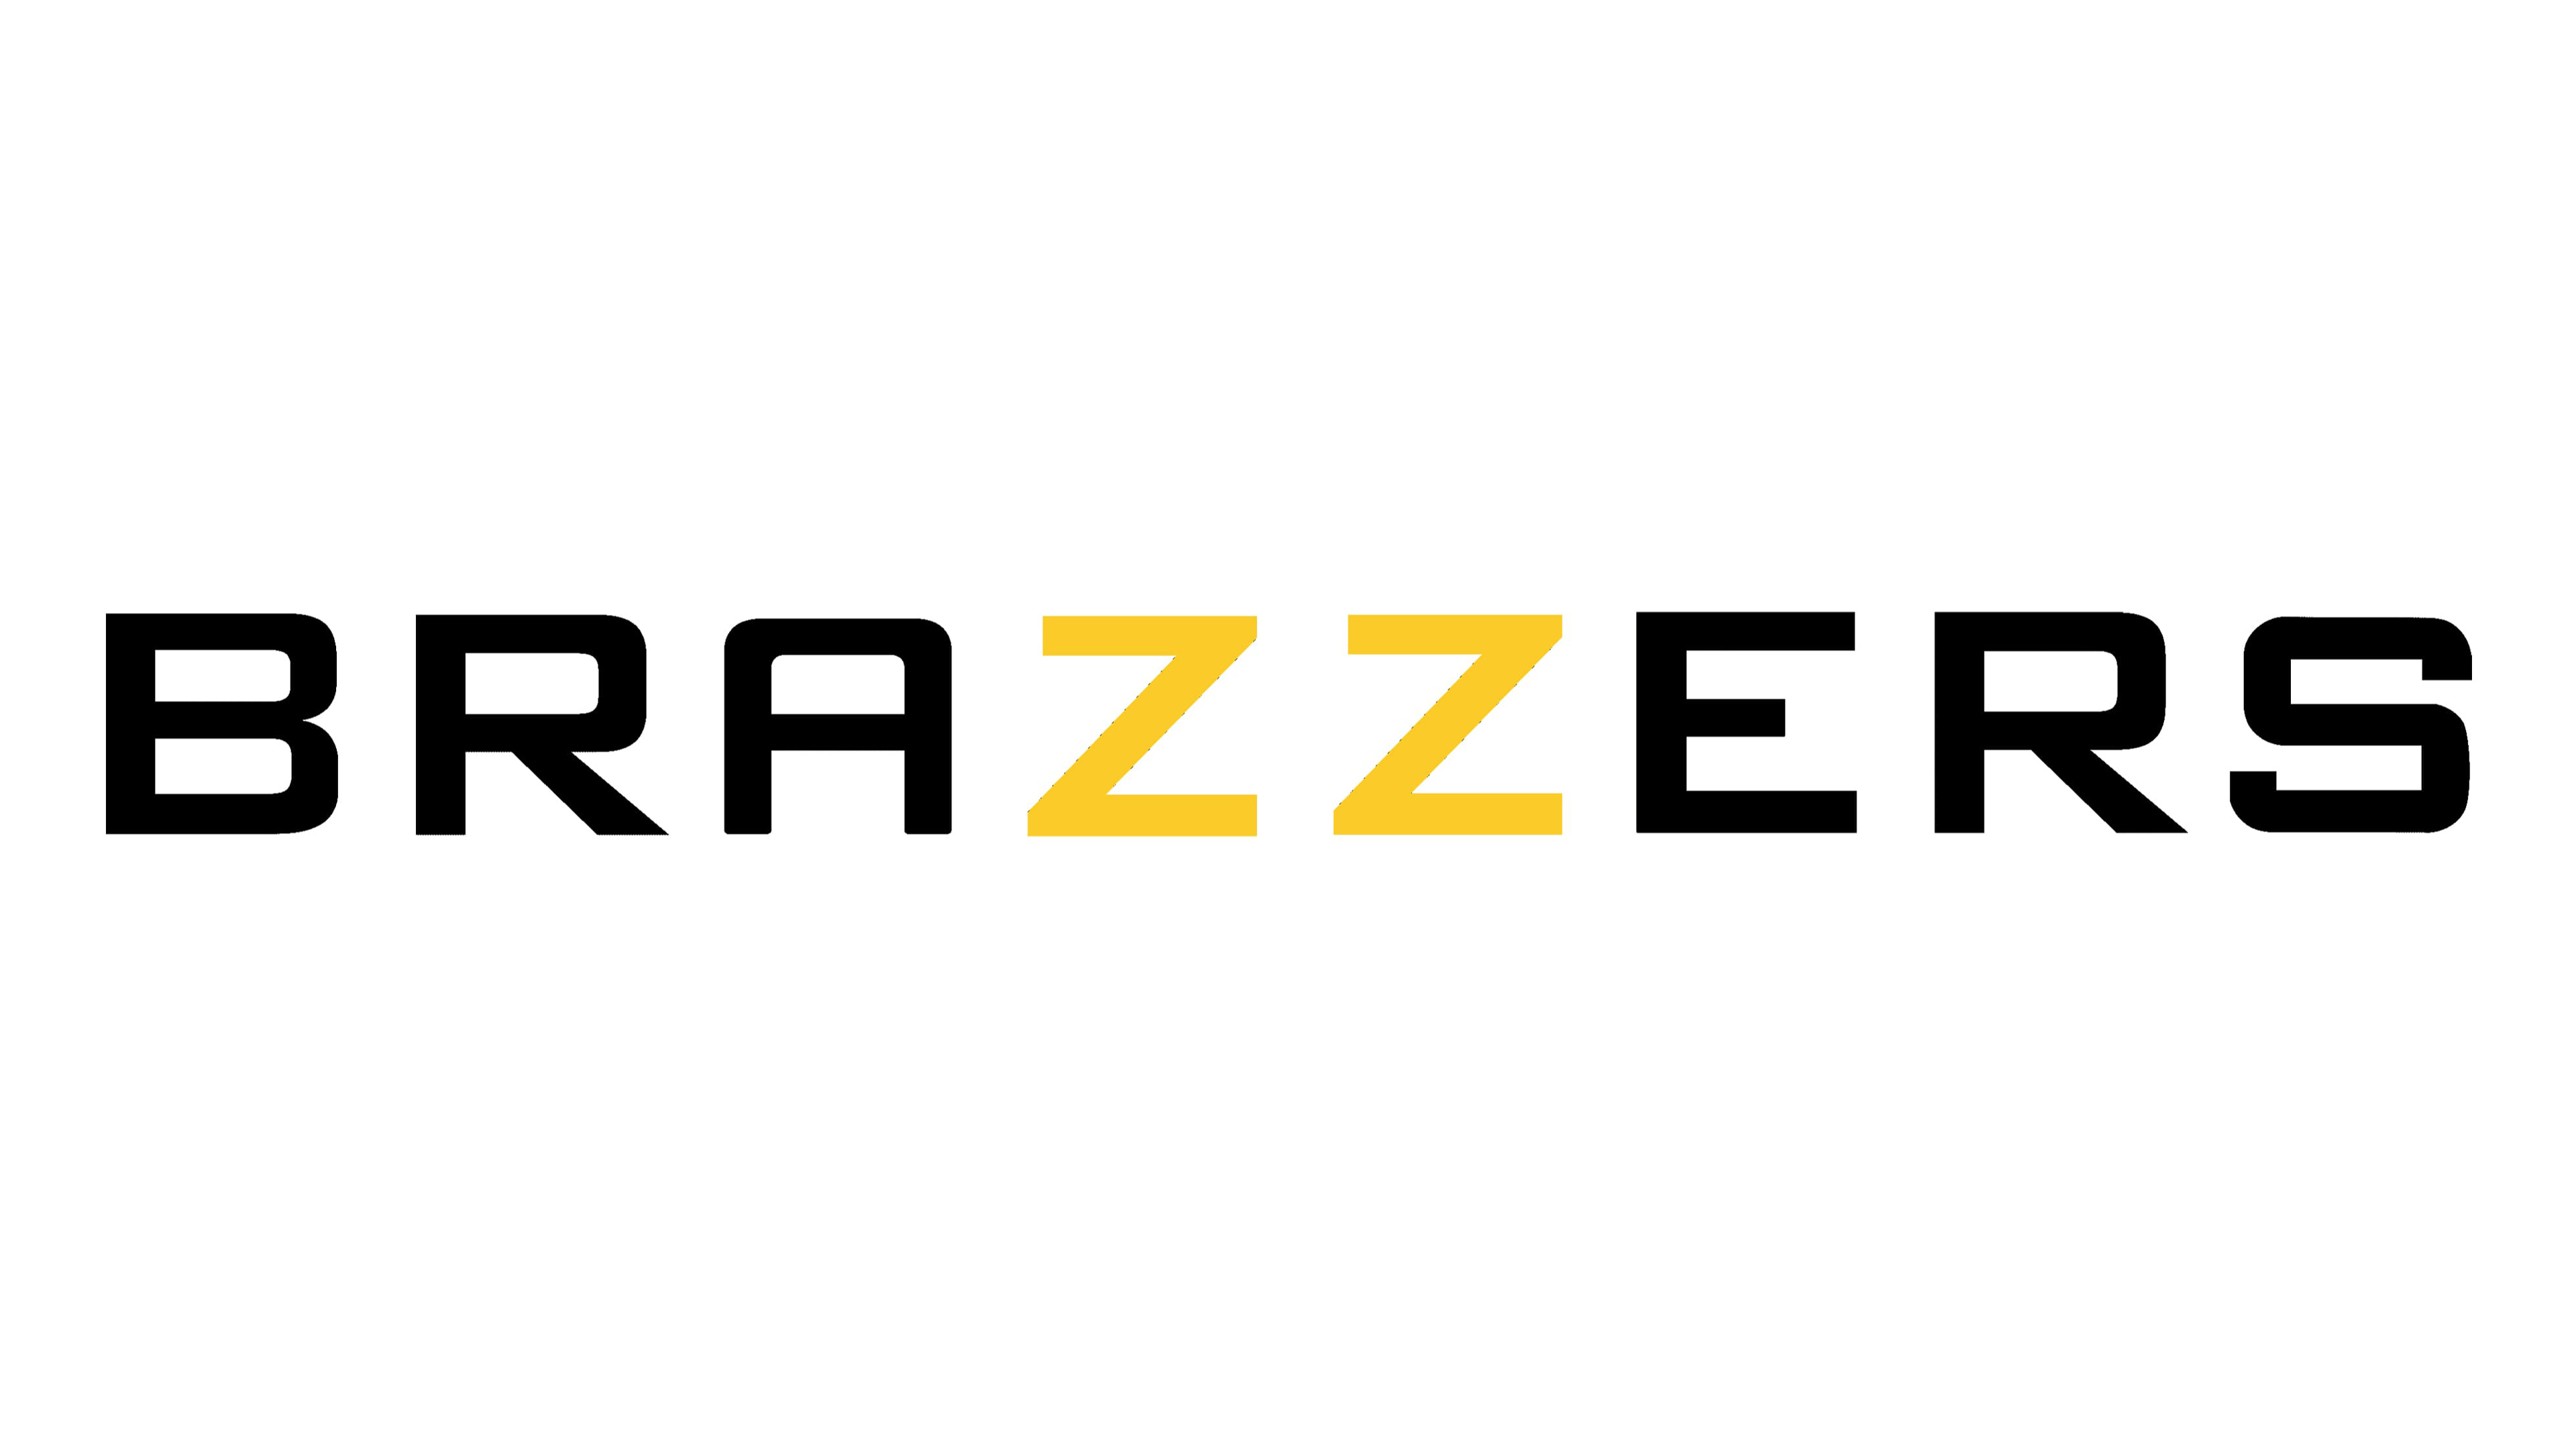 Free Brazzers Logo Png Images Hd Brazzers Logo Png Xx Photoz Site My